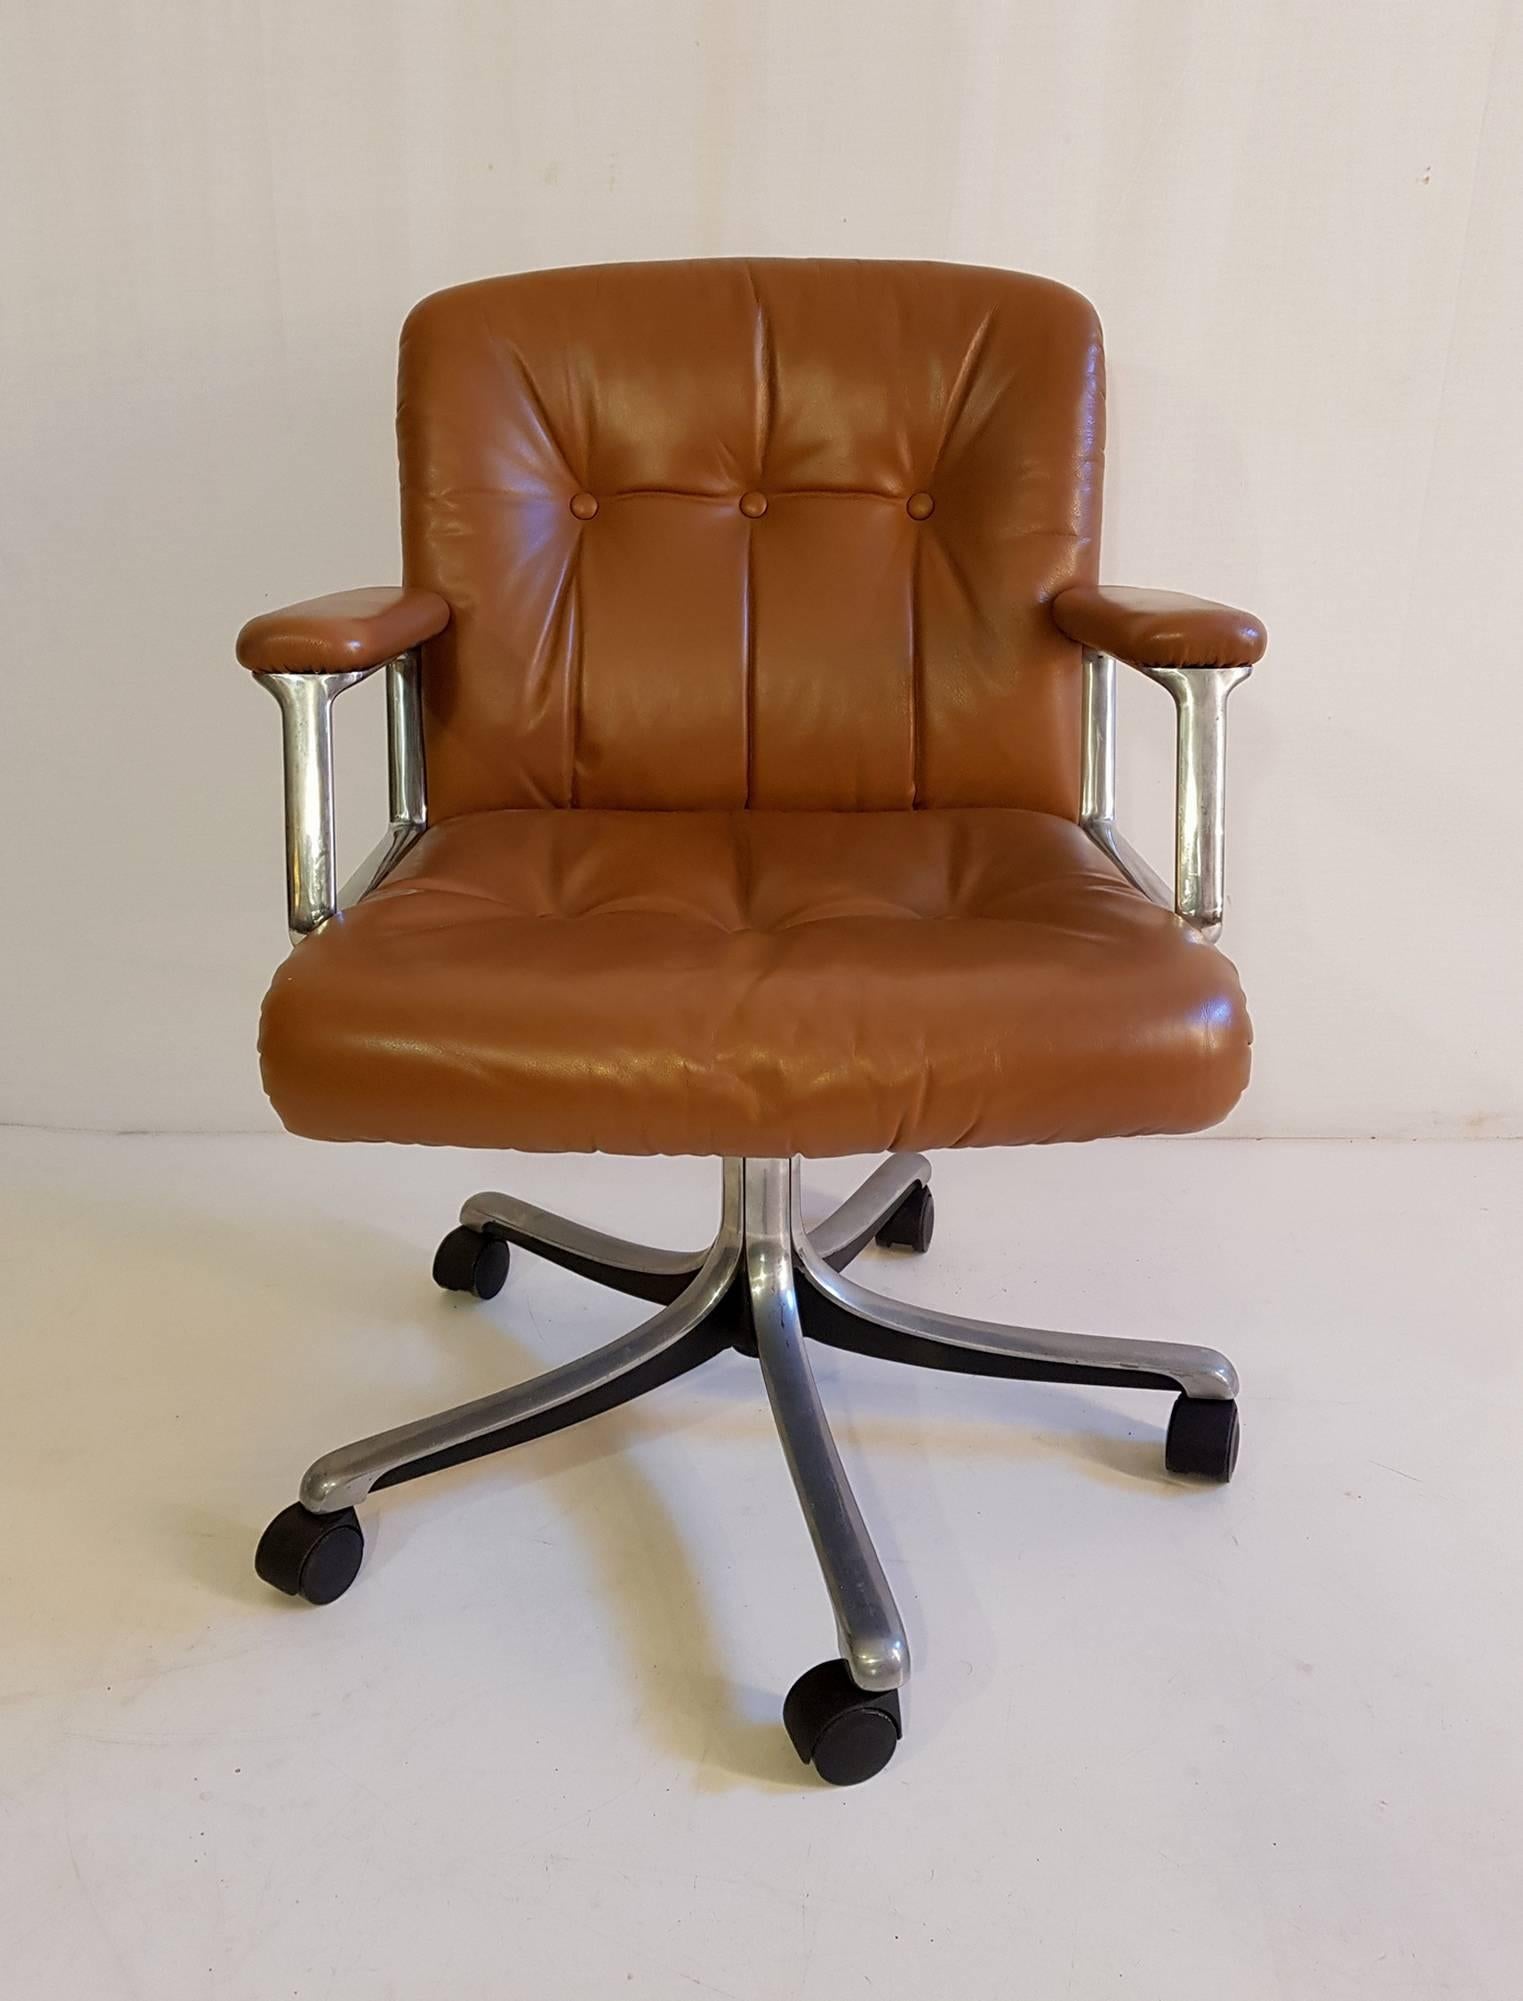 Swivel office chair in cognac brown leather and cast aluminium designed by Osvaldo Borsani in 1972 for Tecno. This chair is adjustable in height between 44-53 cm.